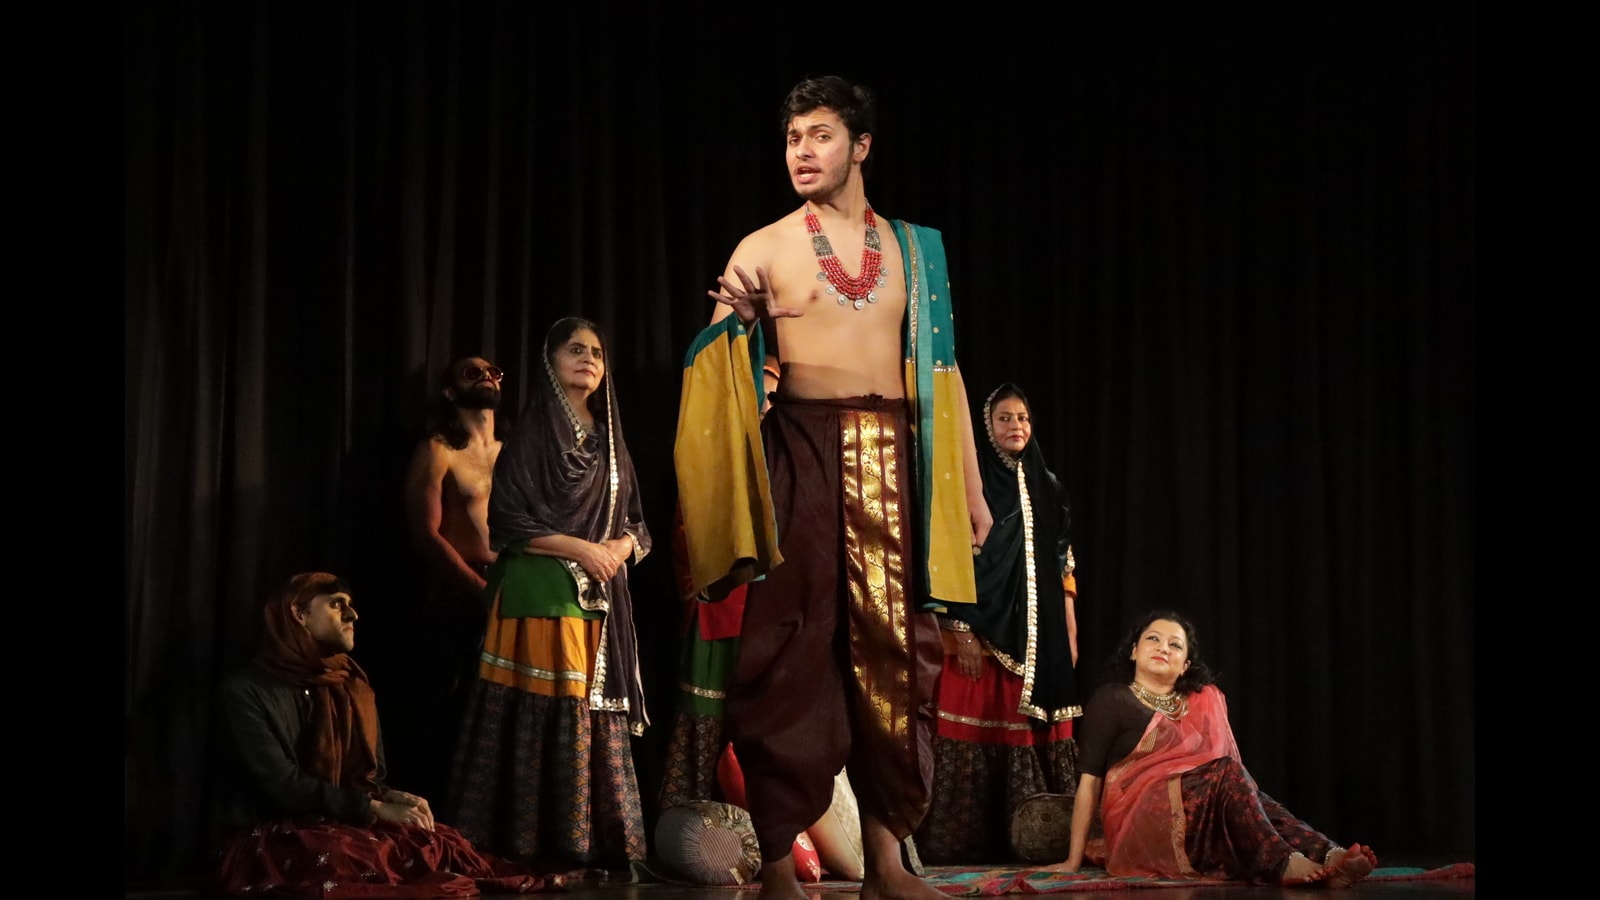 Mahabharata’s personas get a theatrical spin for Delhi stage